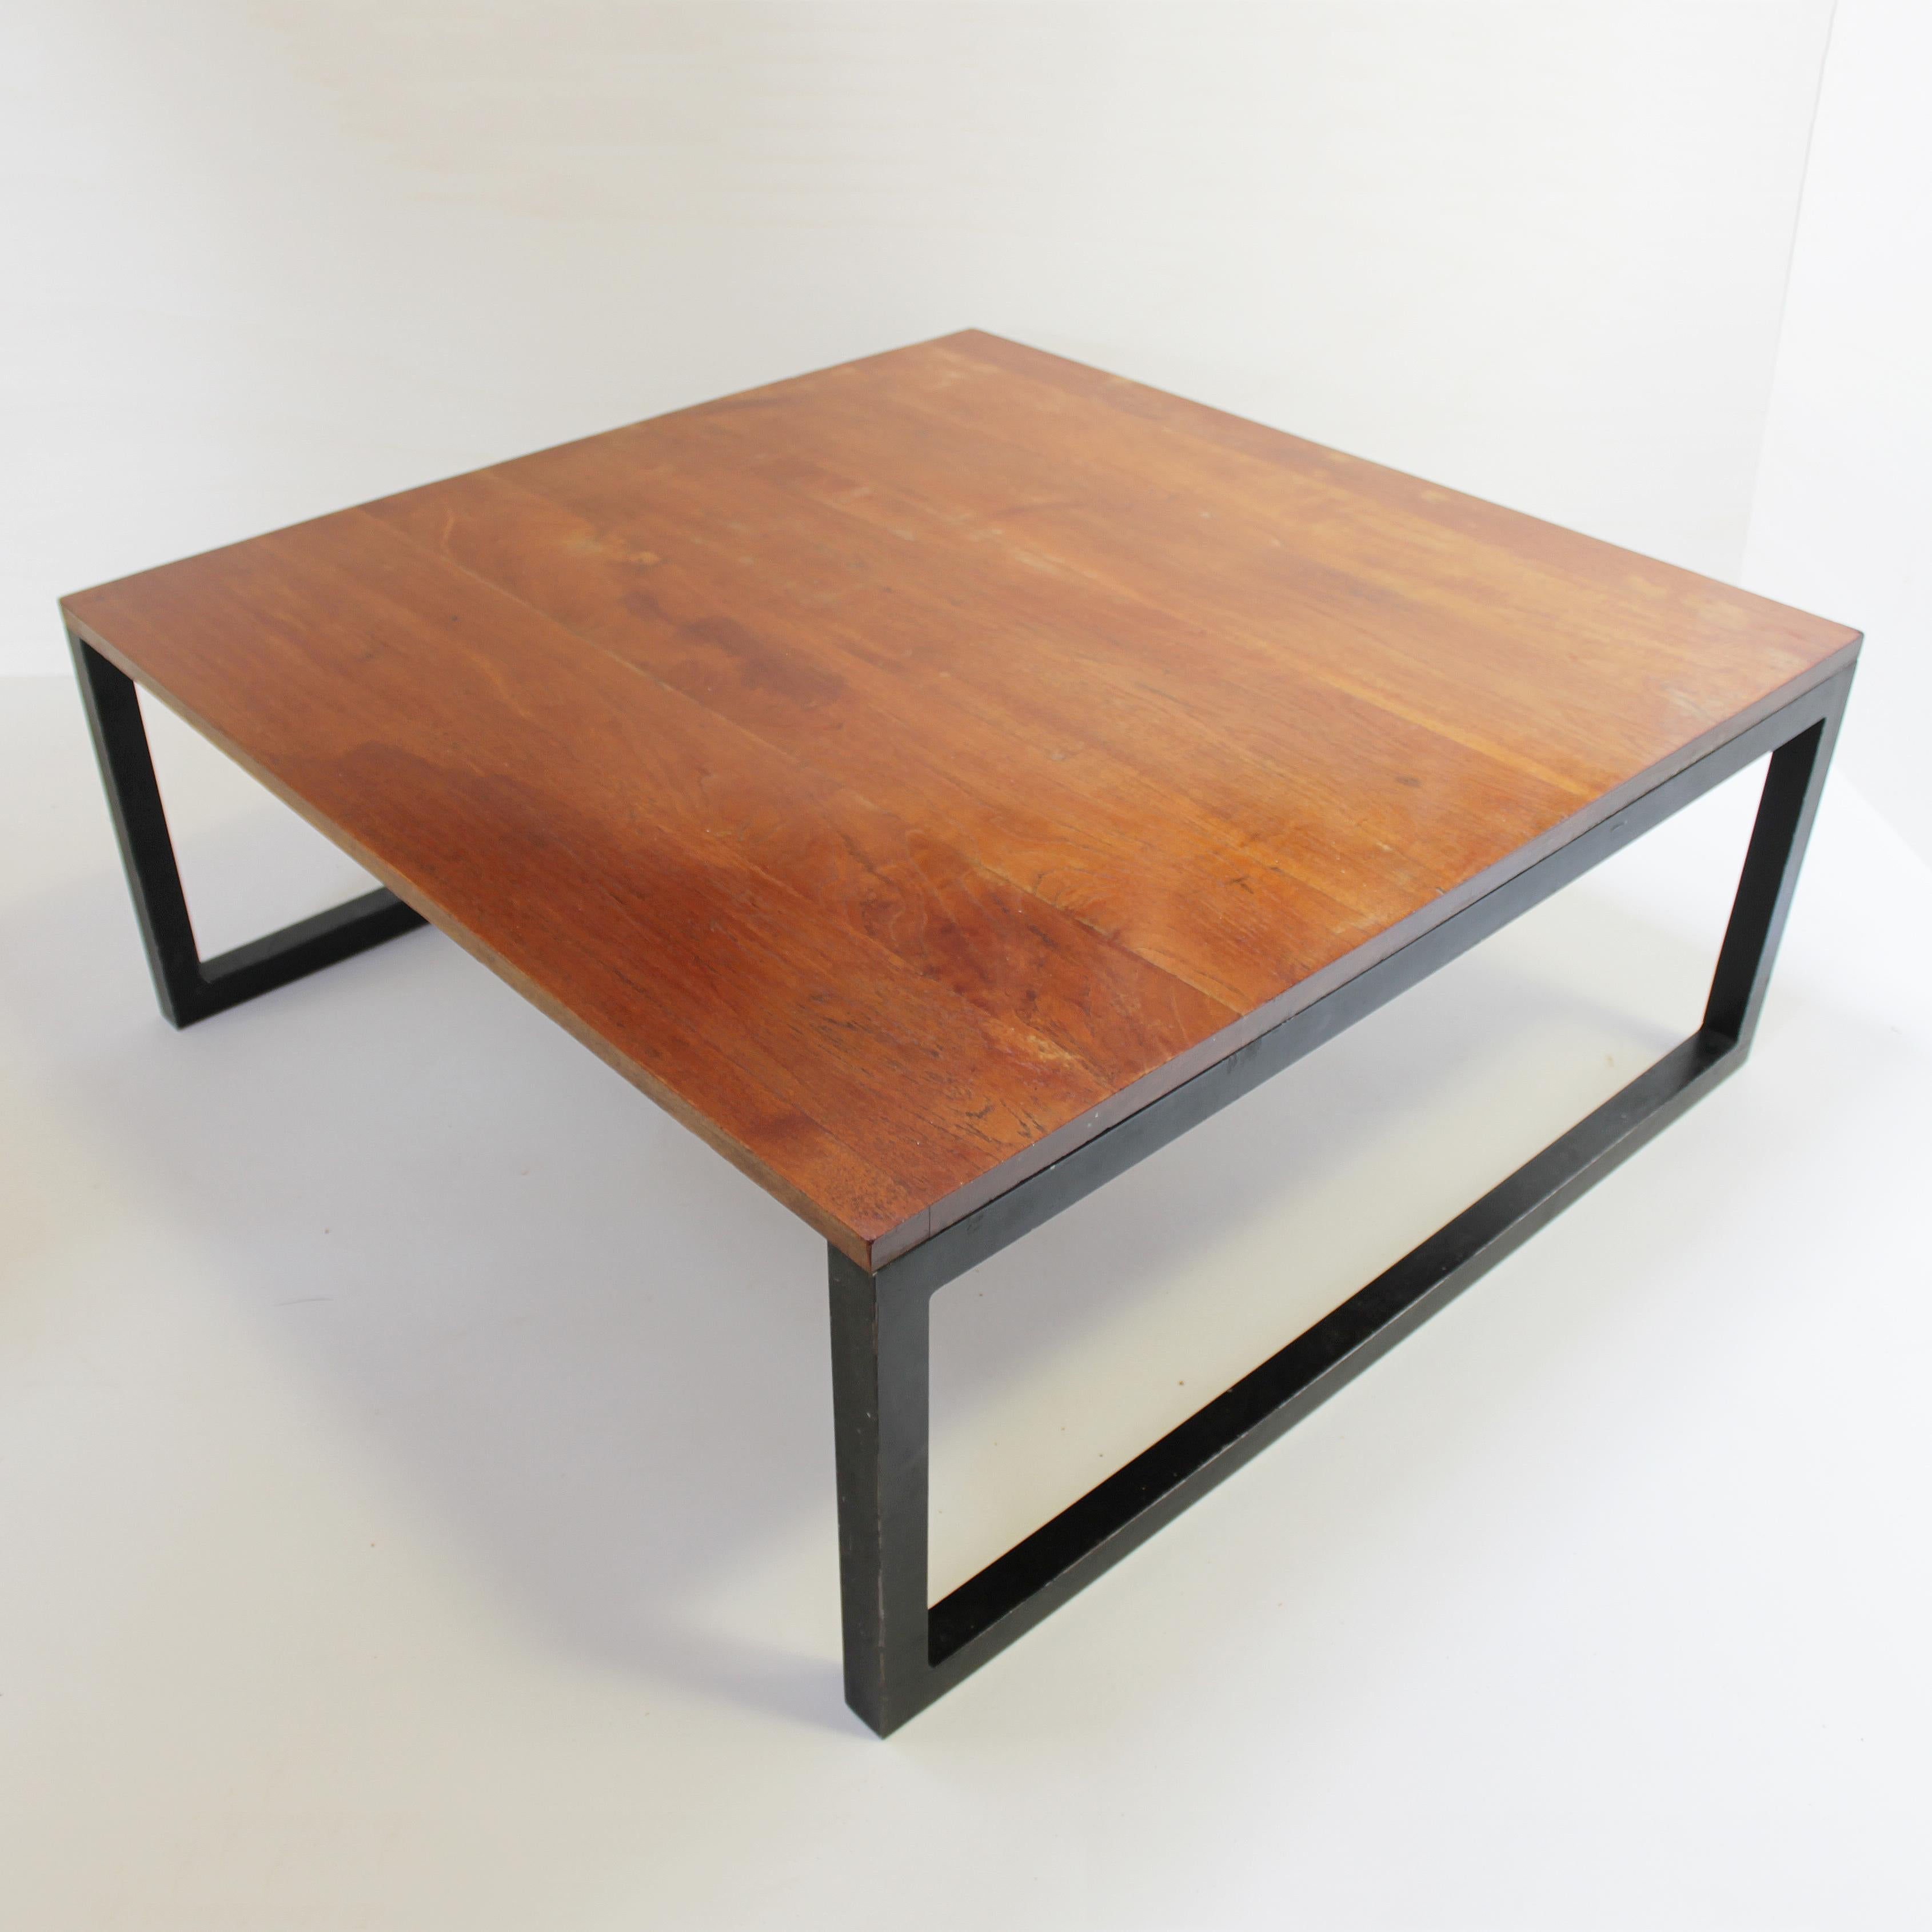 Offered a rare set, a coffee table and two armchairs. Designed by the radical designer and Dutch architect Wim den Boon. Custom made.
- Coffee table, teak and steel. Dimensions: height 17.3 in. (44 cm), width 43.3 in. (110 cm), depth 43.3 in. (110